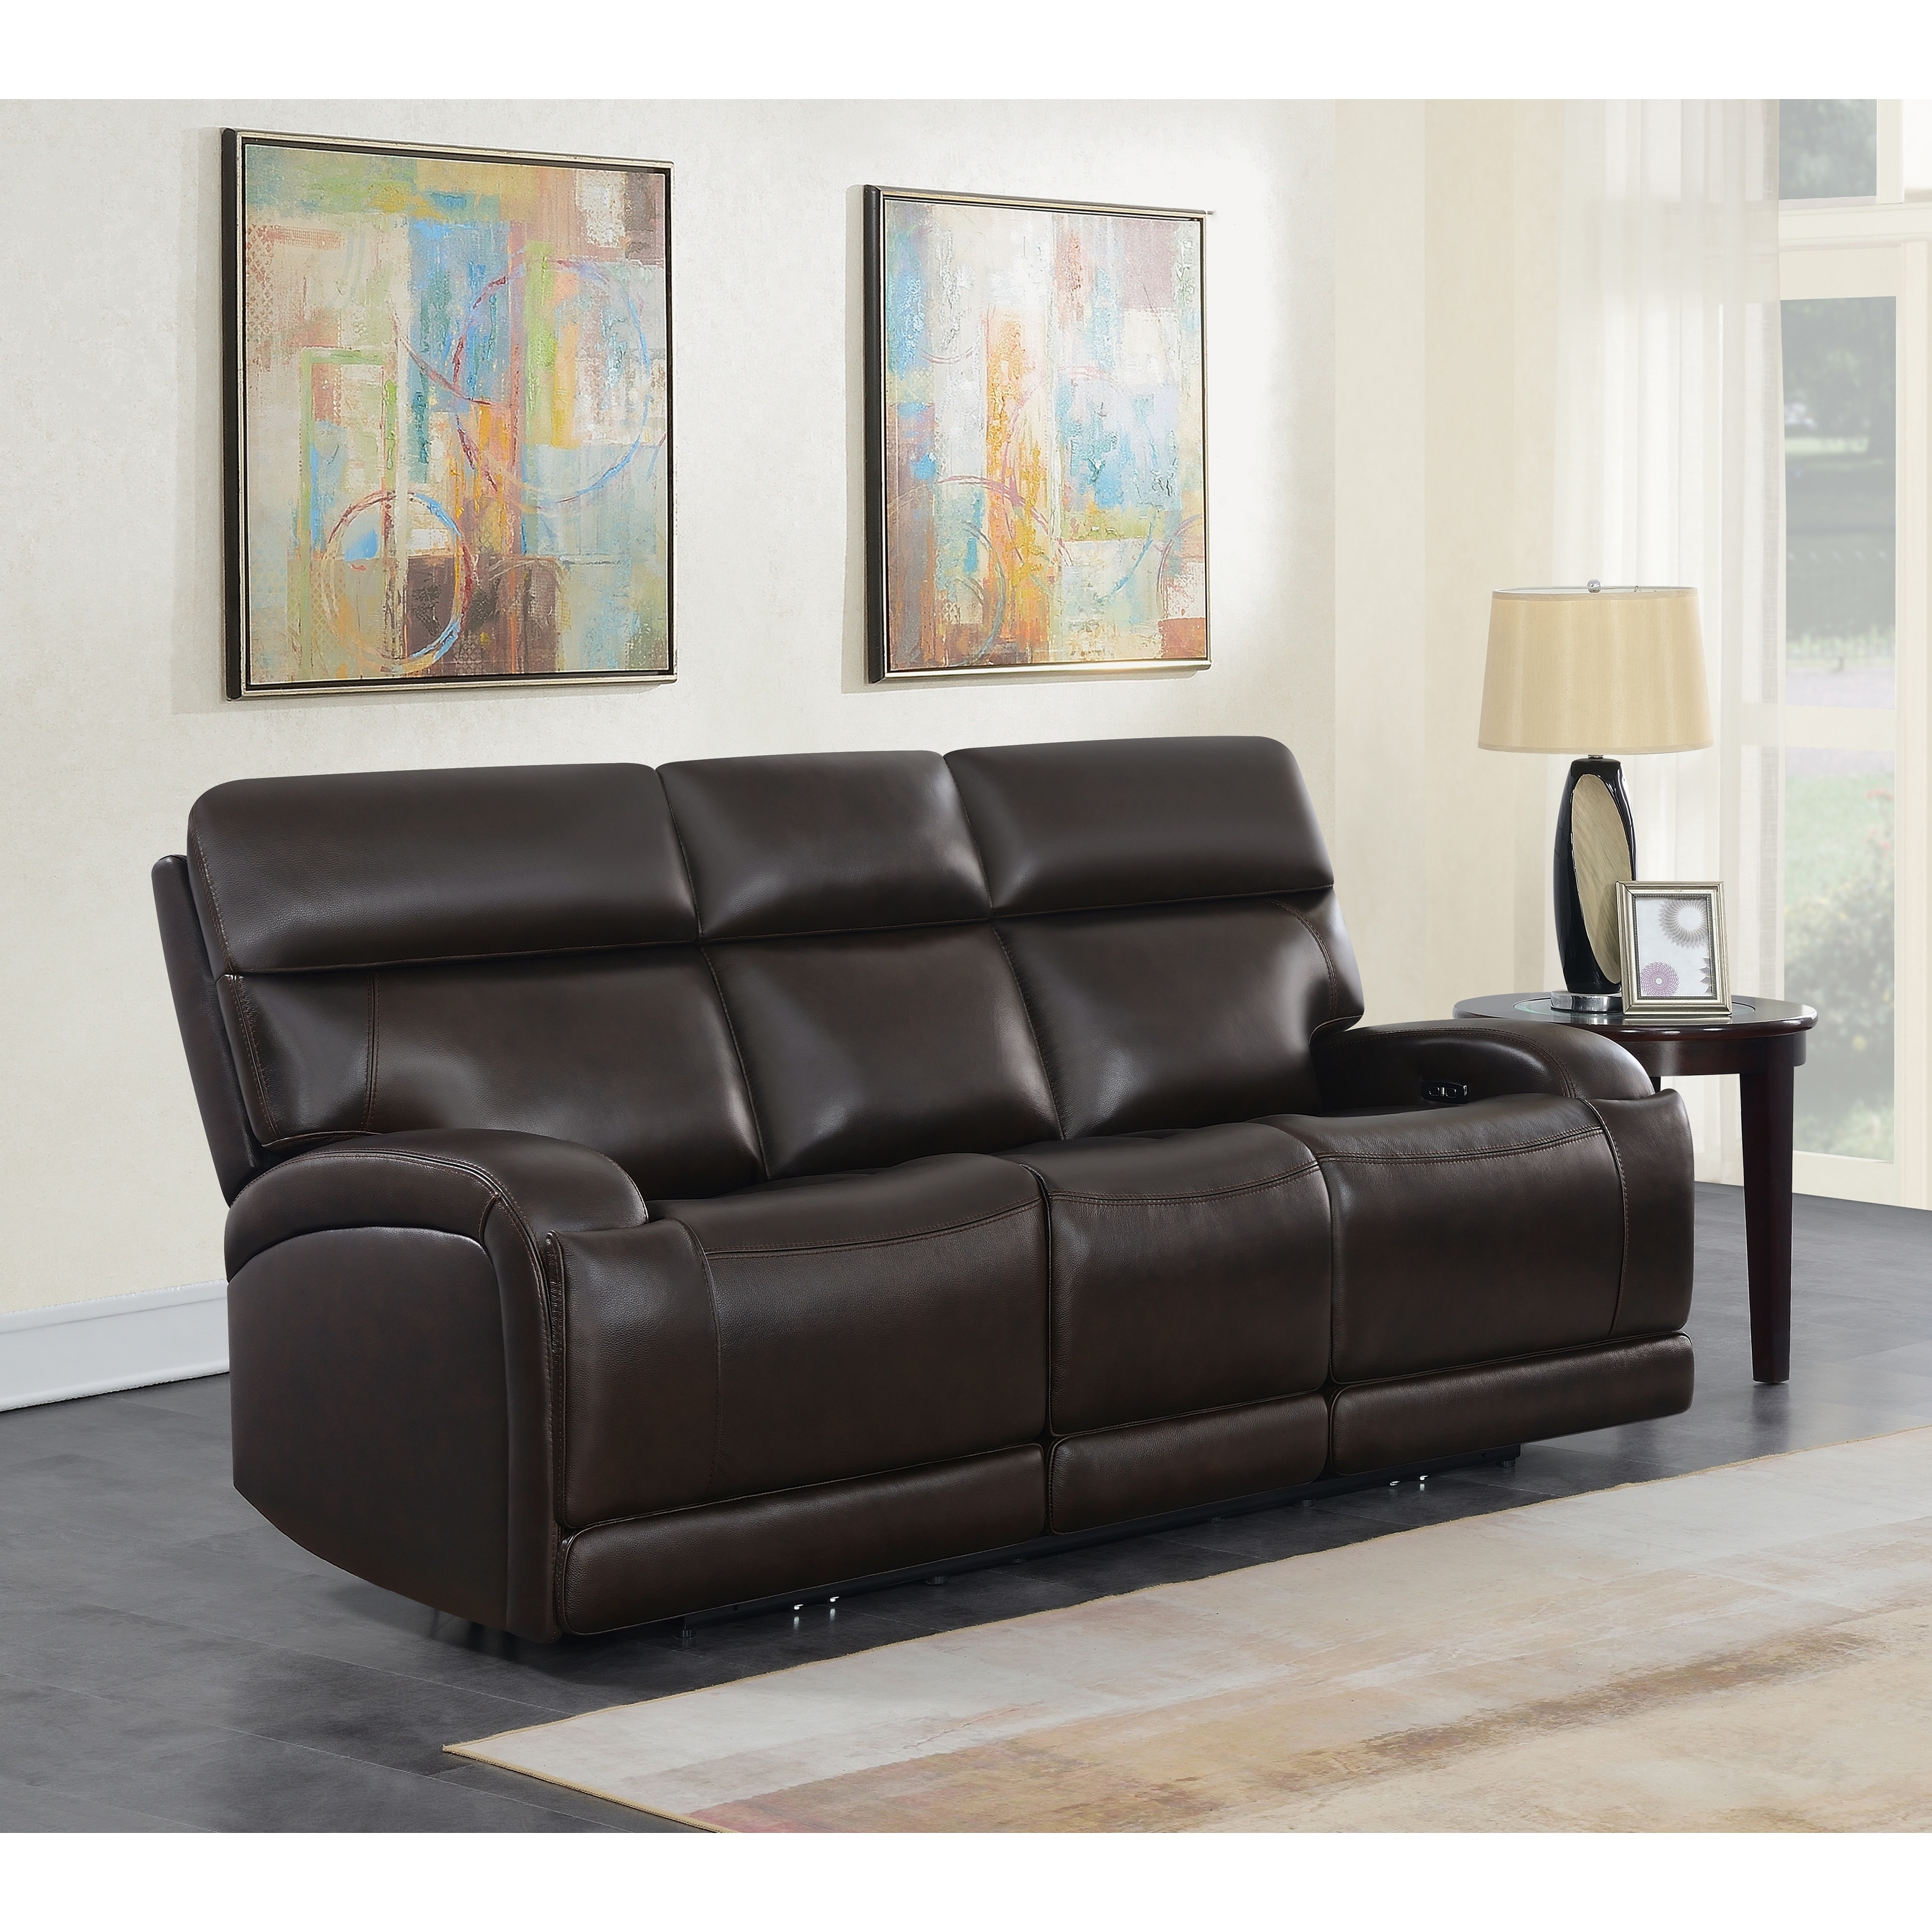 Marcelle Upholstered Power Sofa with Power Outlet - Overstock - 33991718